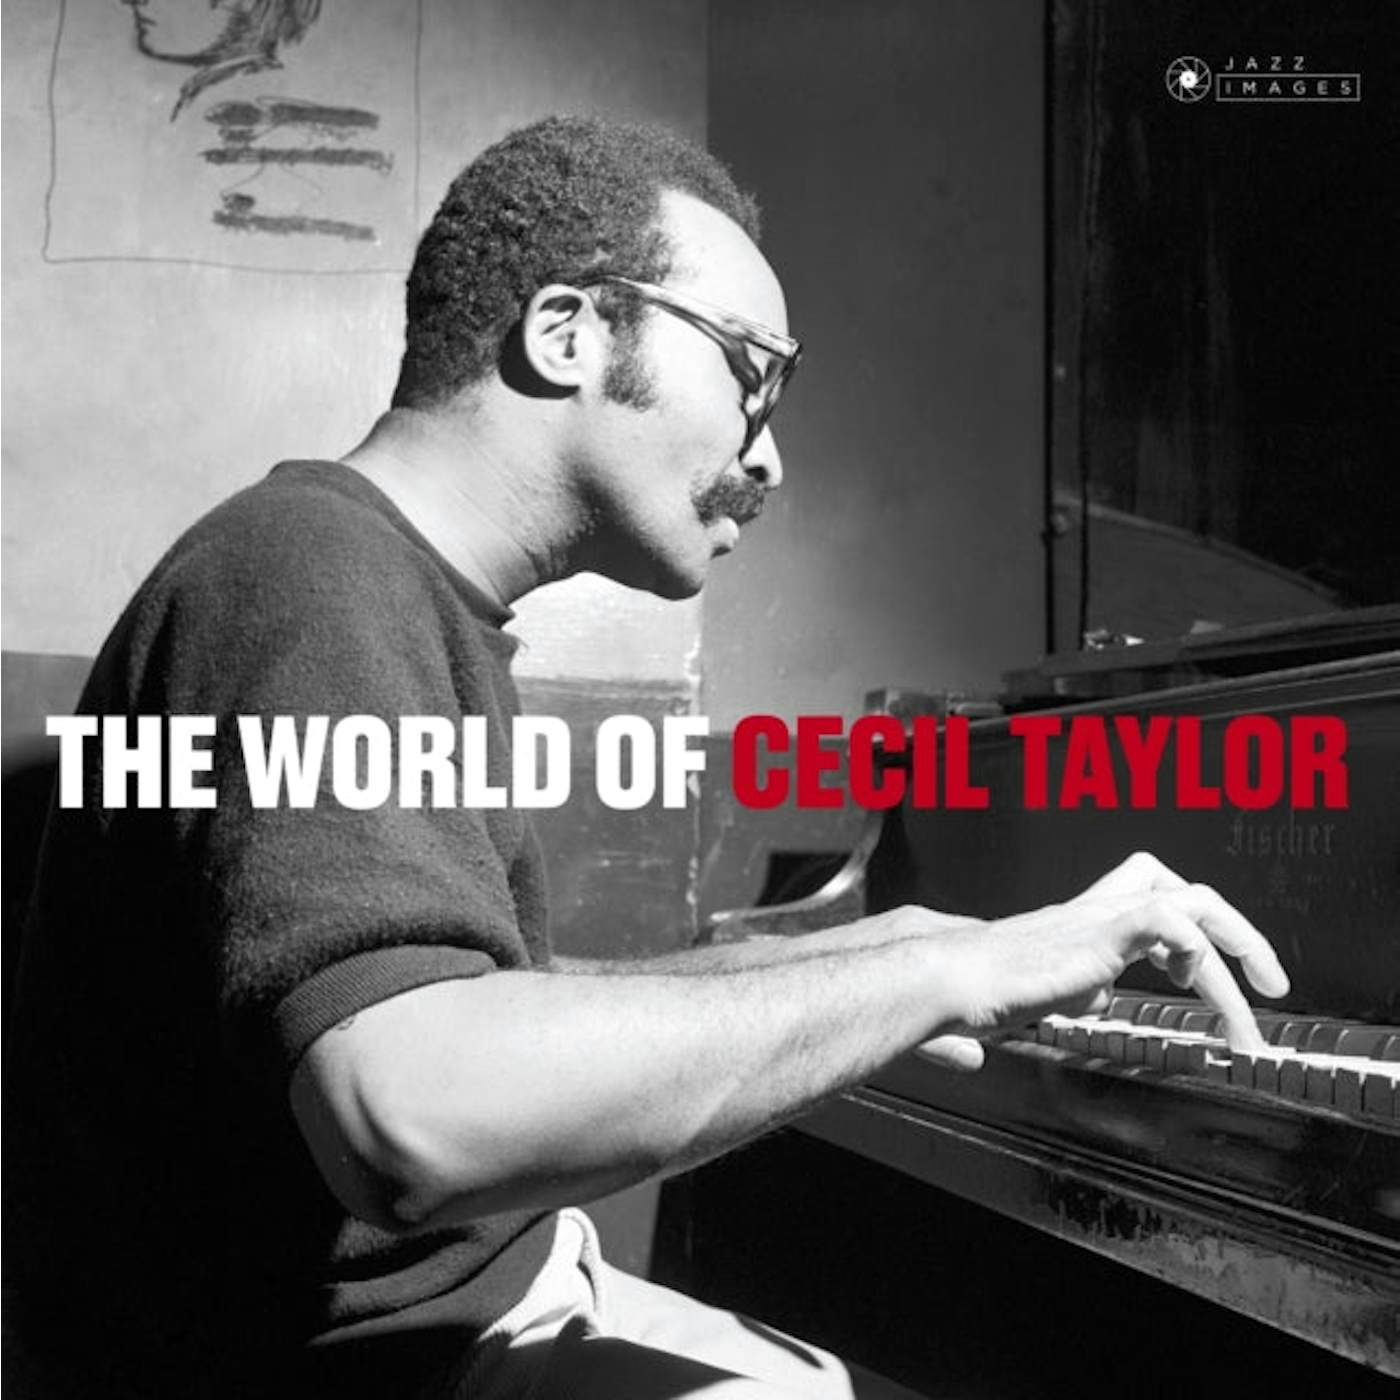 Cecil Taylor LP - World Of Cecil Taylor The (Vinyl)